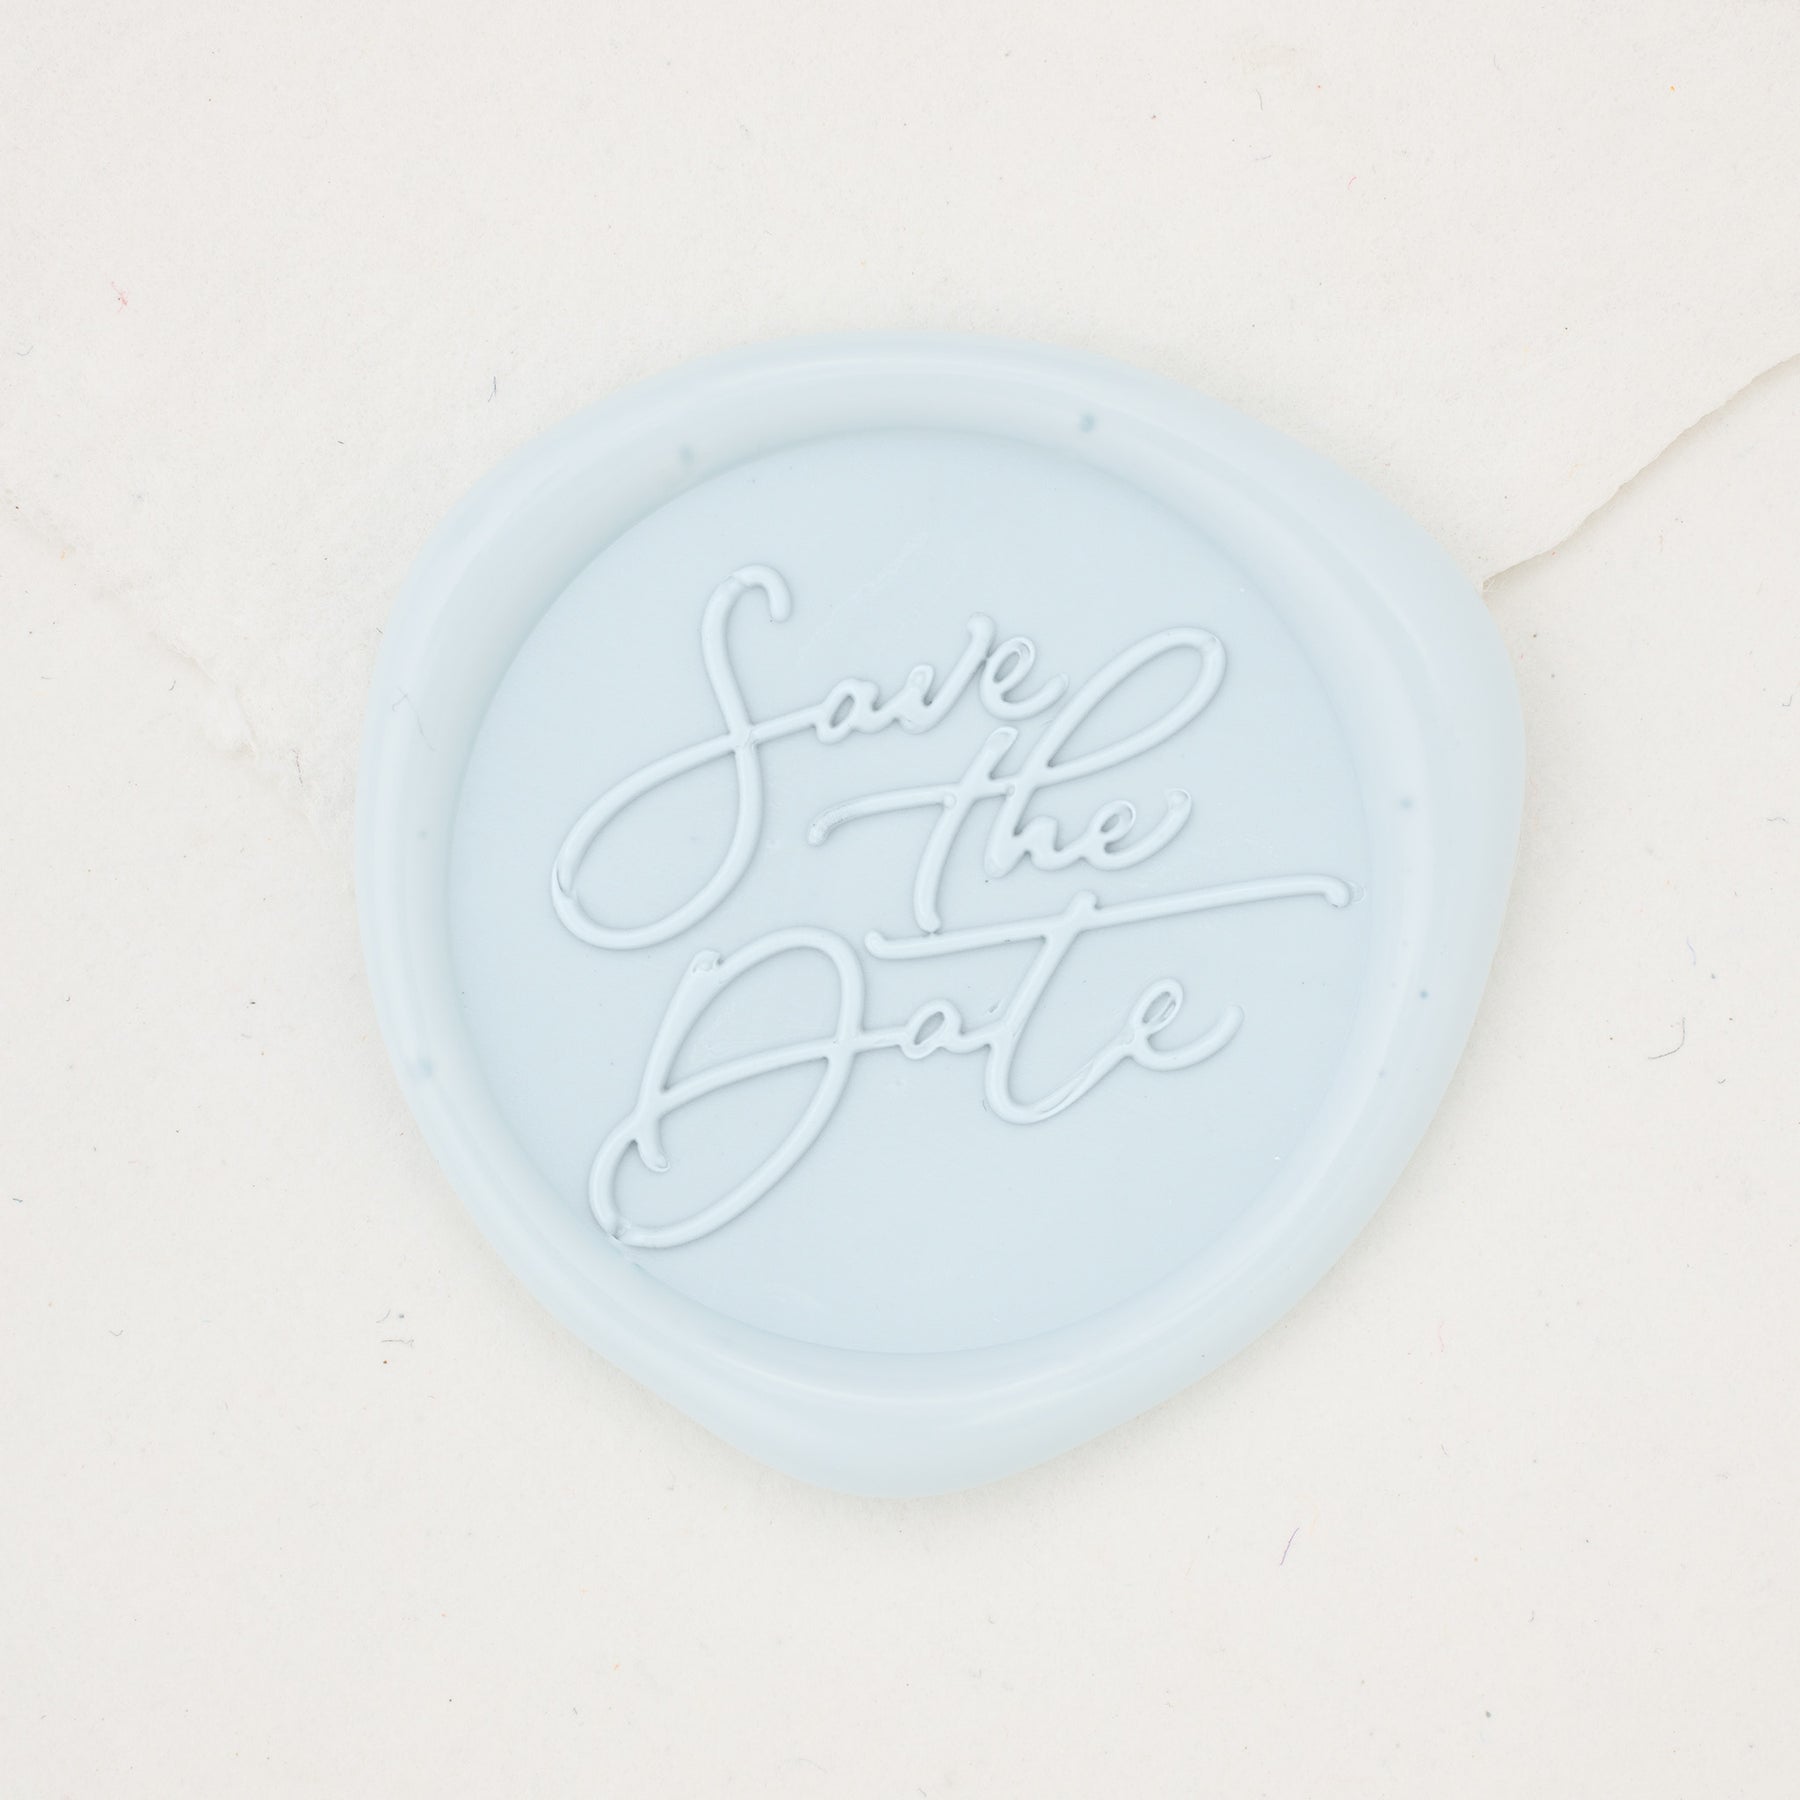 40-New Oval Shape Wedding Envelope Stickers/Seals: SAVE THE DATE